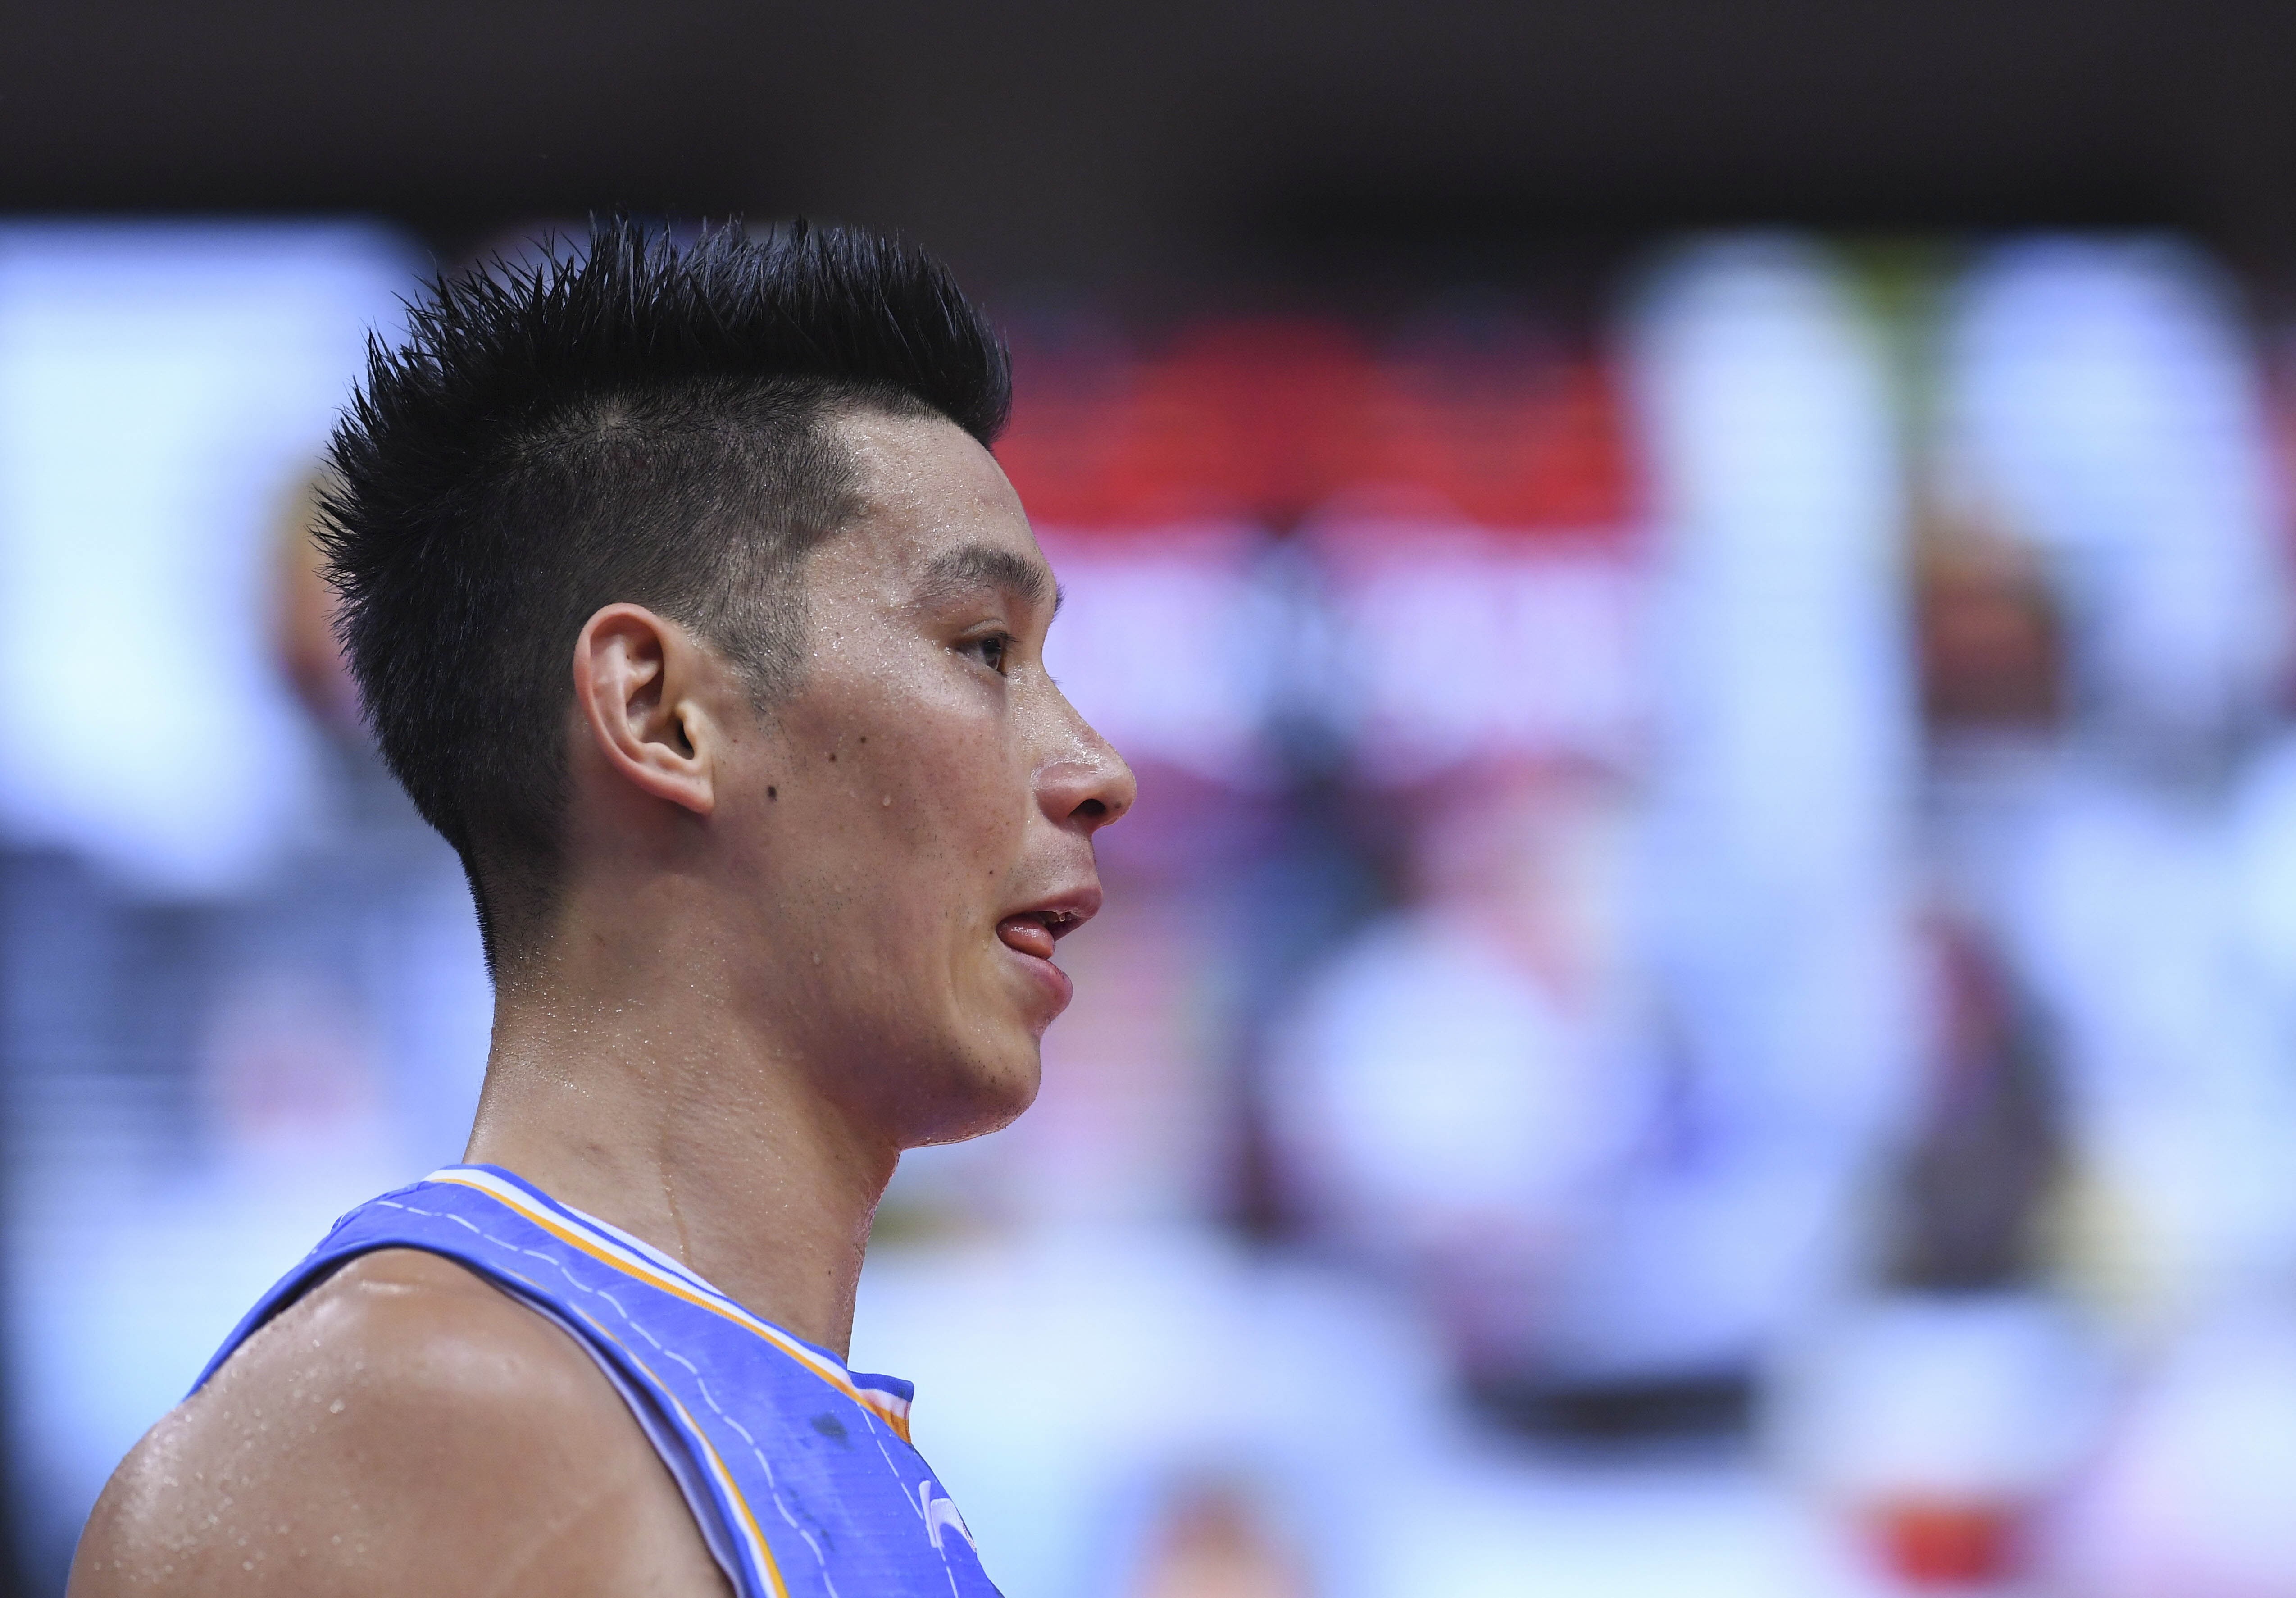 Views From The Edge: AAPI Athletes: So  about Jeremy Lin's hair - again